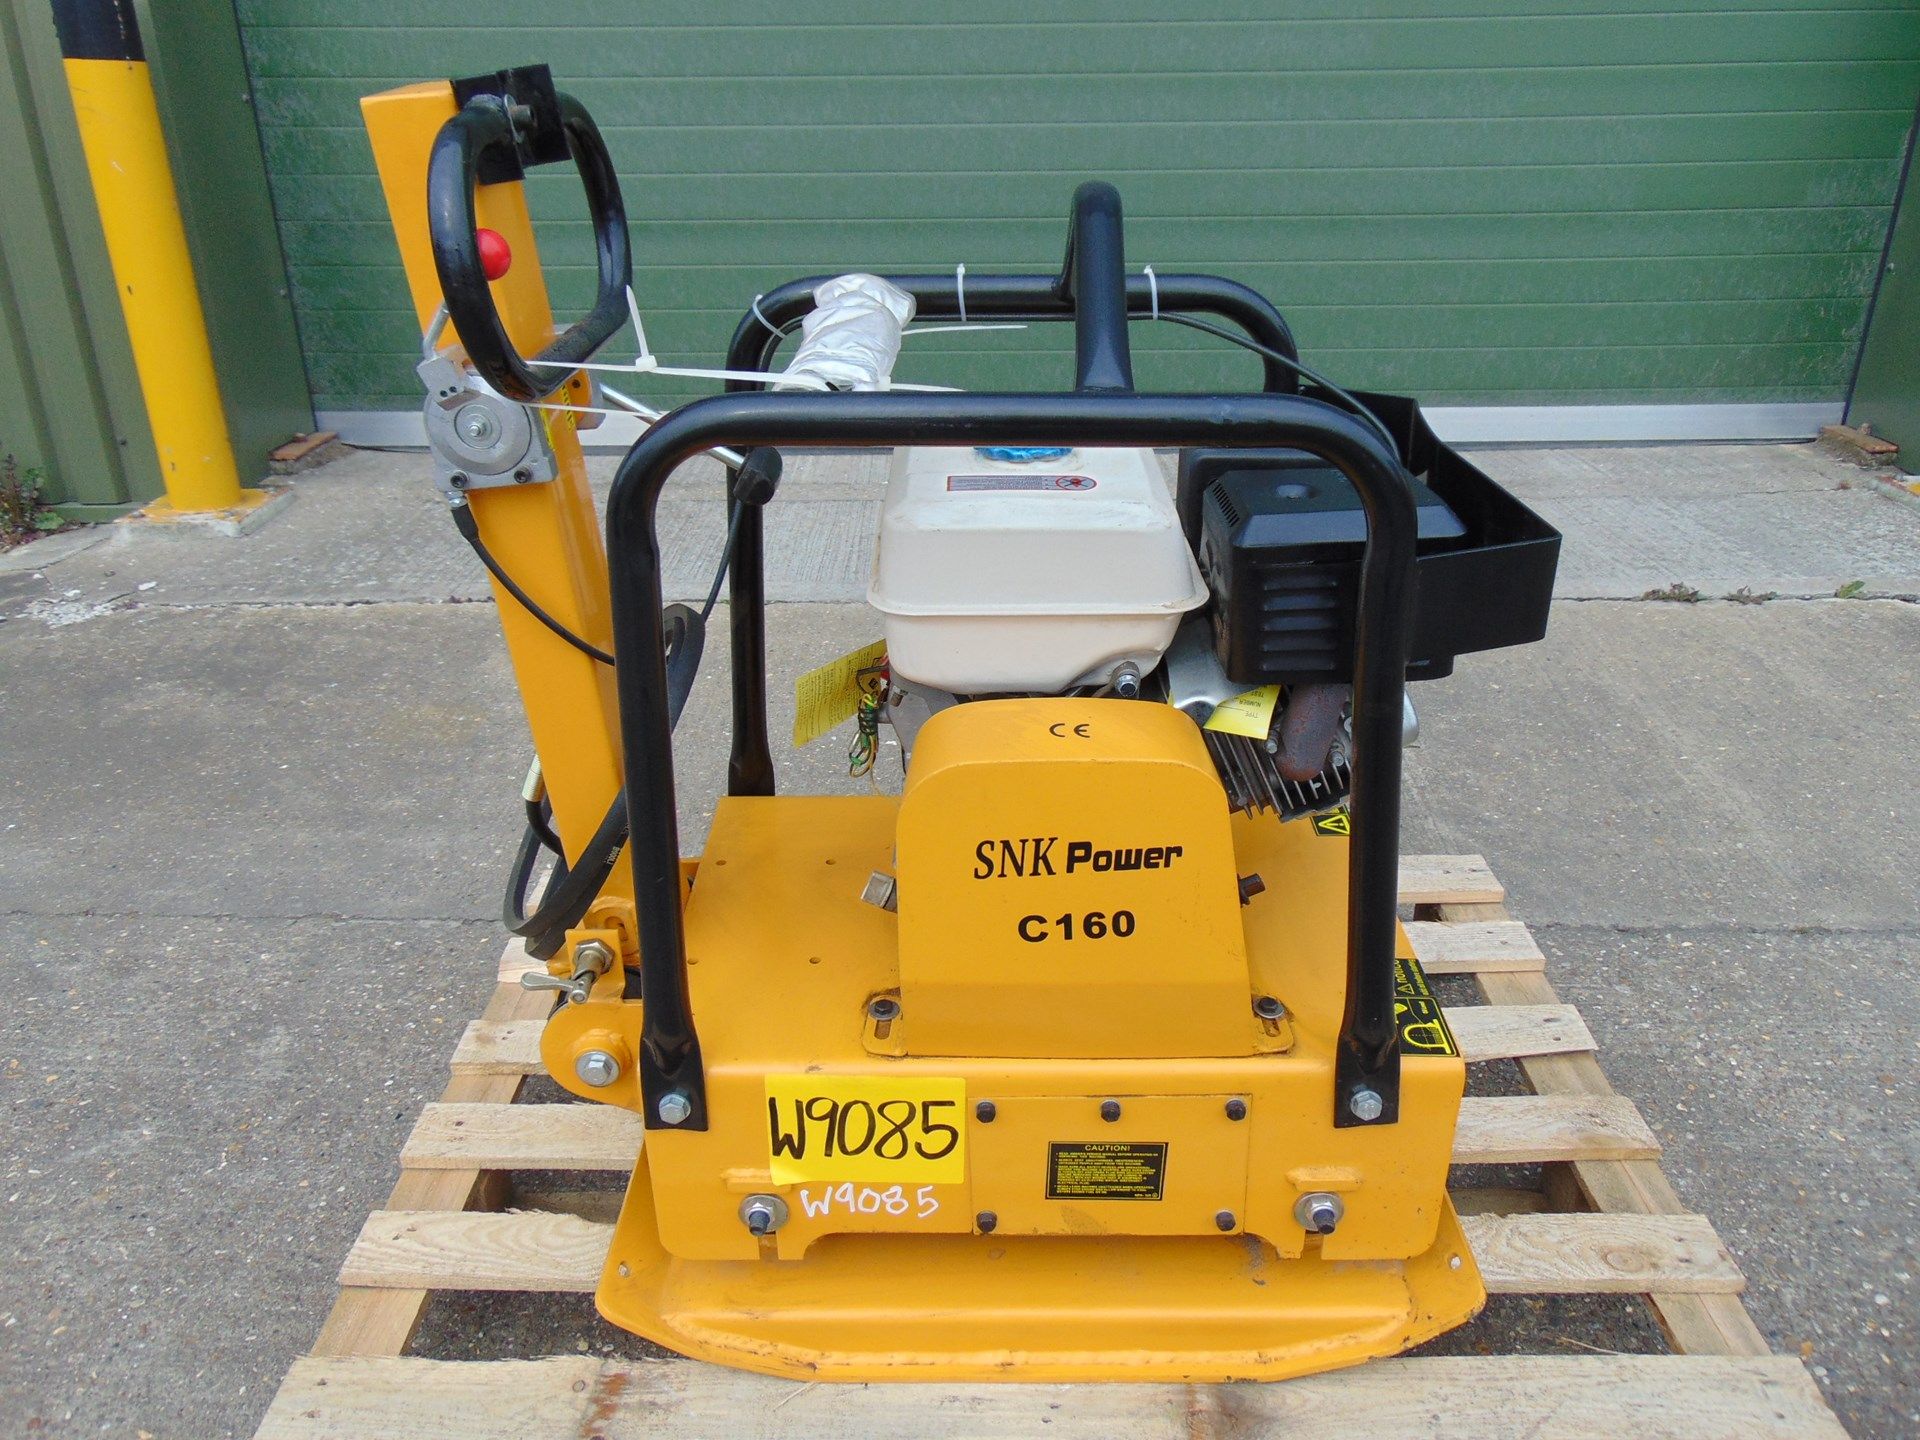 New & Unused SNK Power C160 Petrol Powered Compaction Wacker Plate - Image 3 of 11